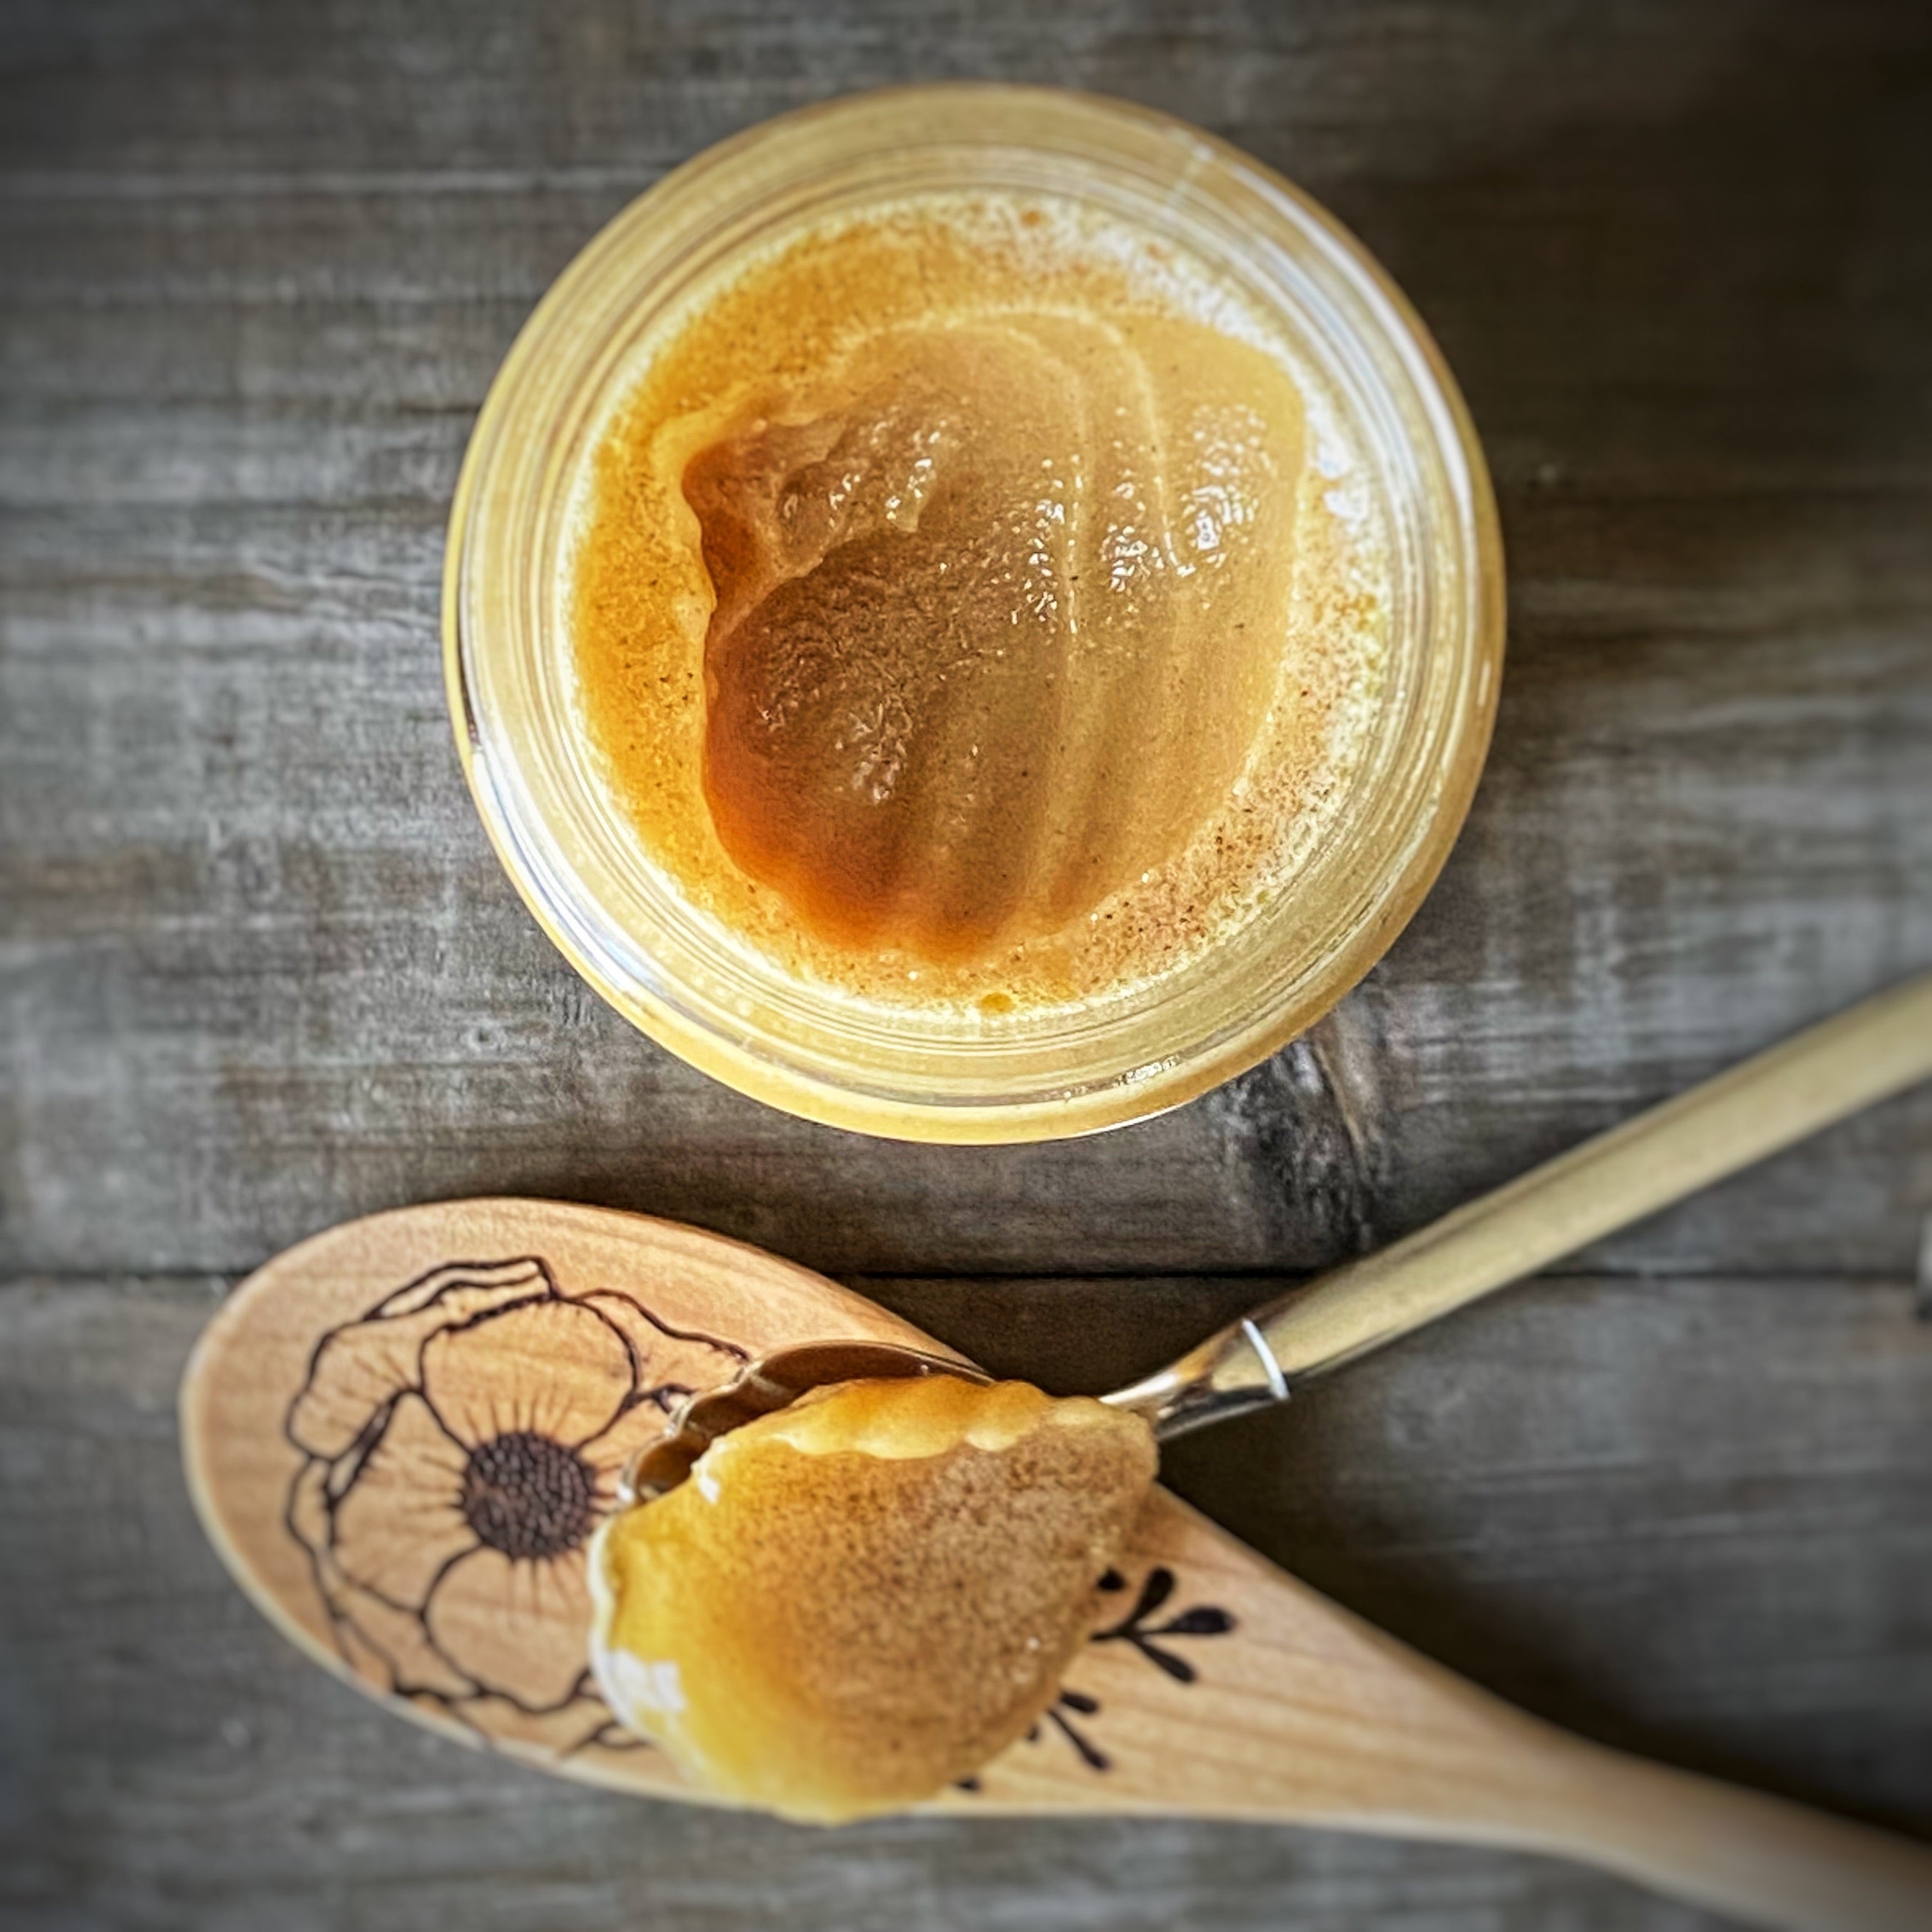 Mill Creek Apiary creamed cinnamon honey is spreadable and delicious